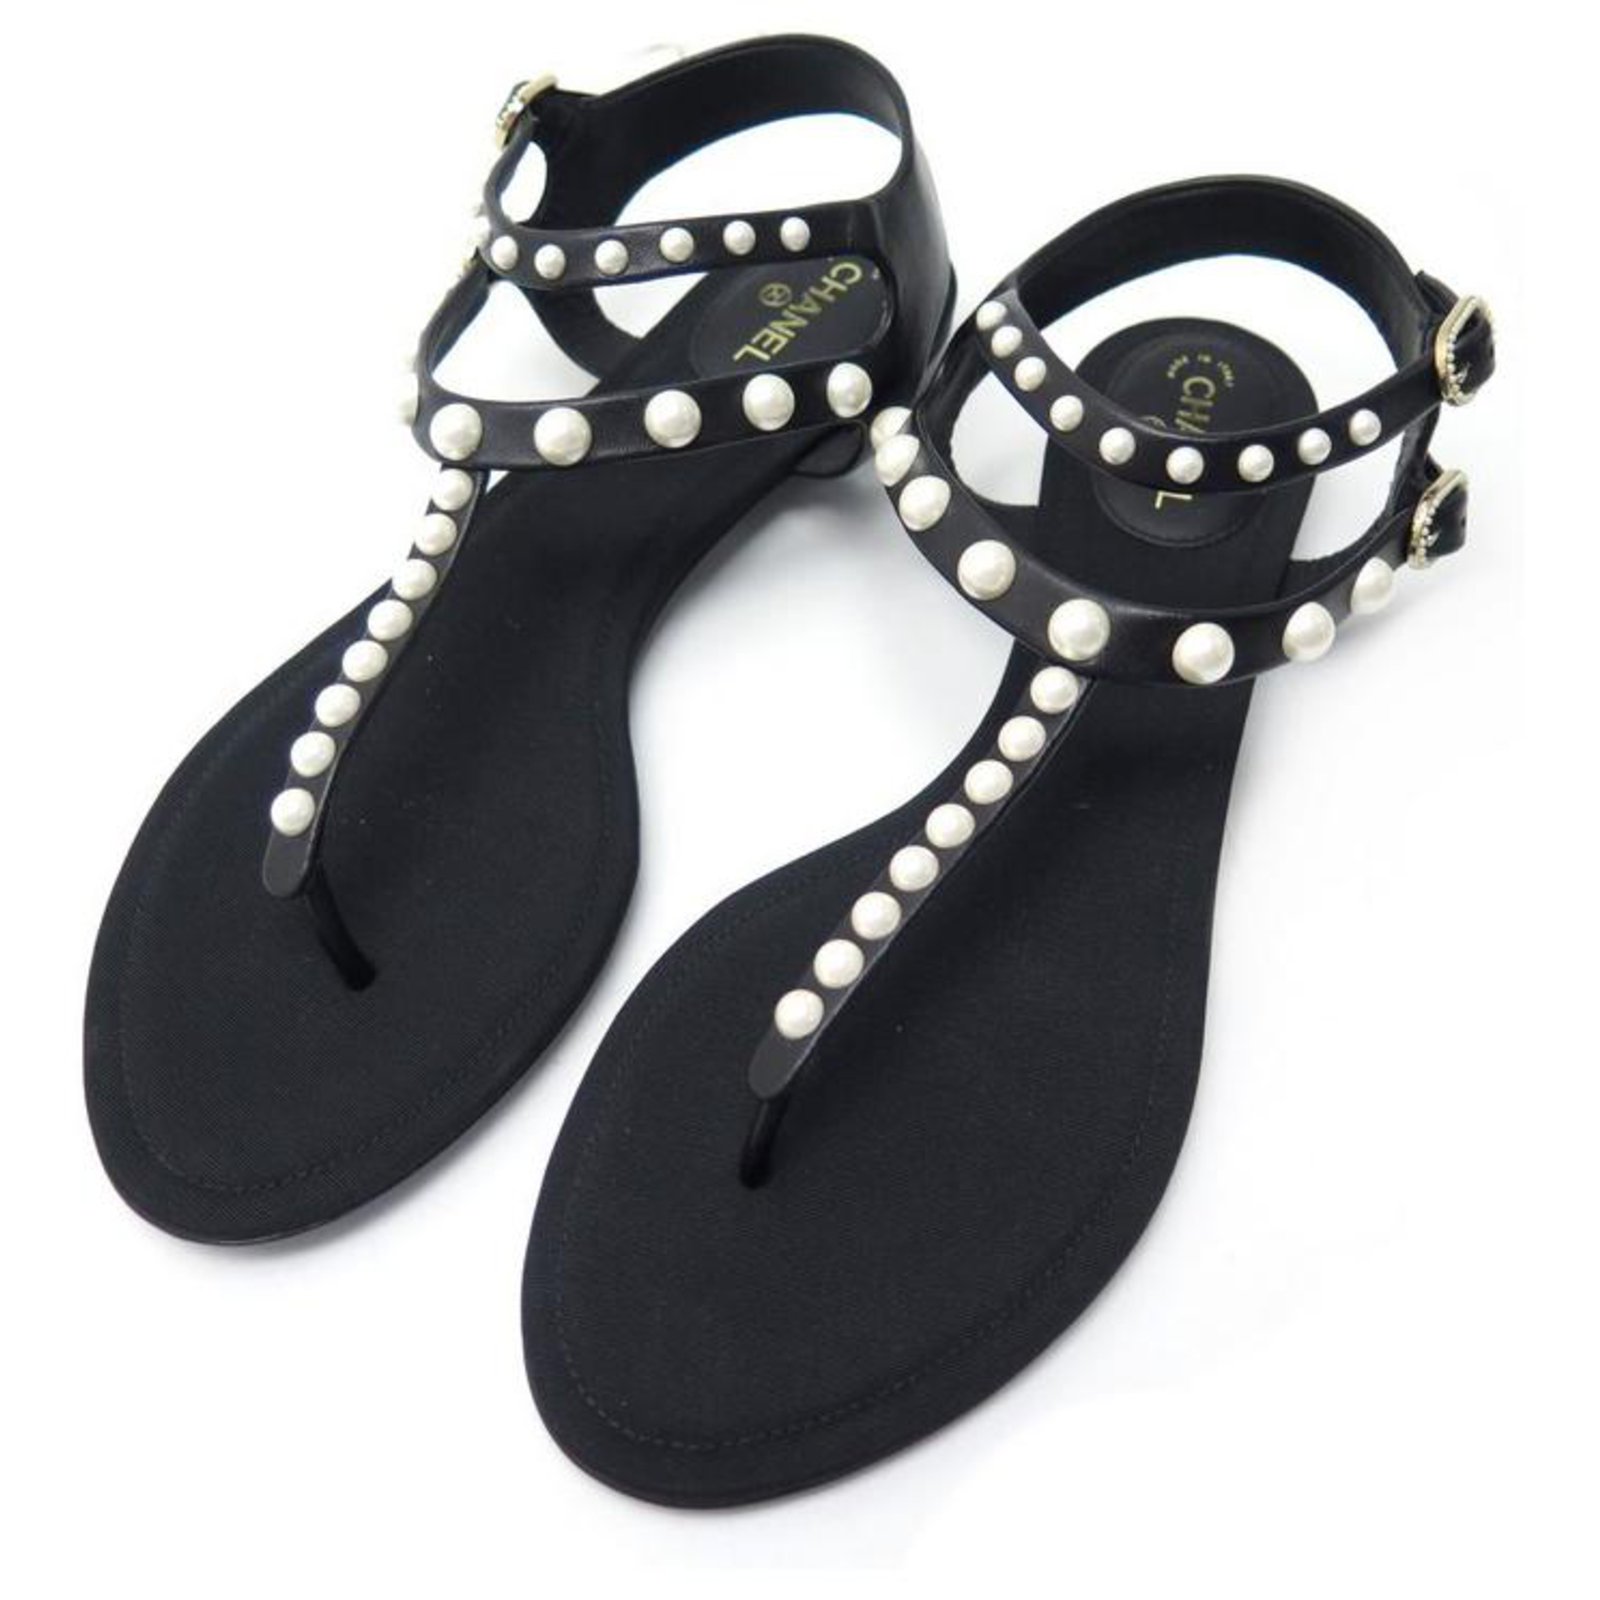 NEW CHANEL SANDALS PEARL L SHOES31653 41 NEW SHOES BLACK LEATHER